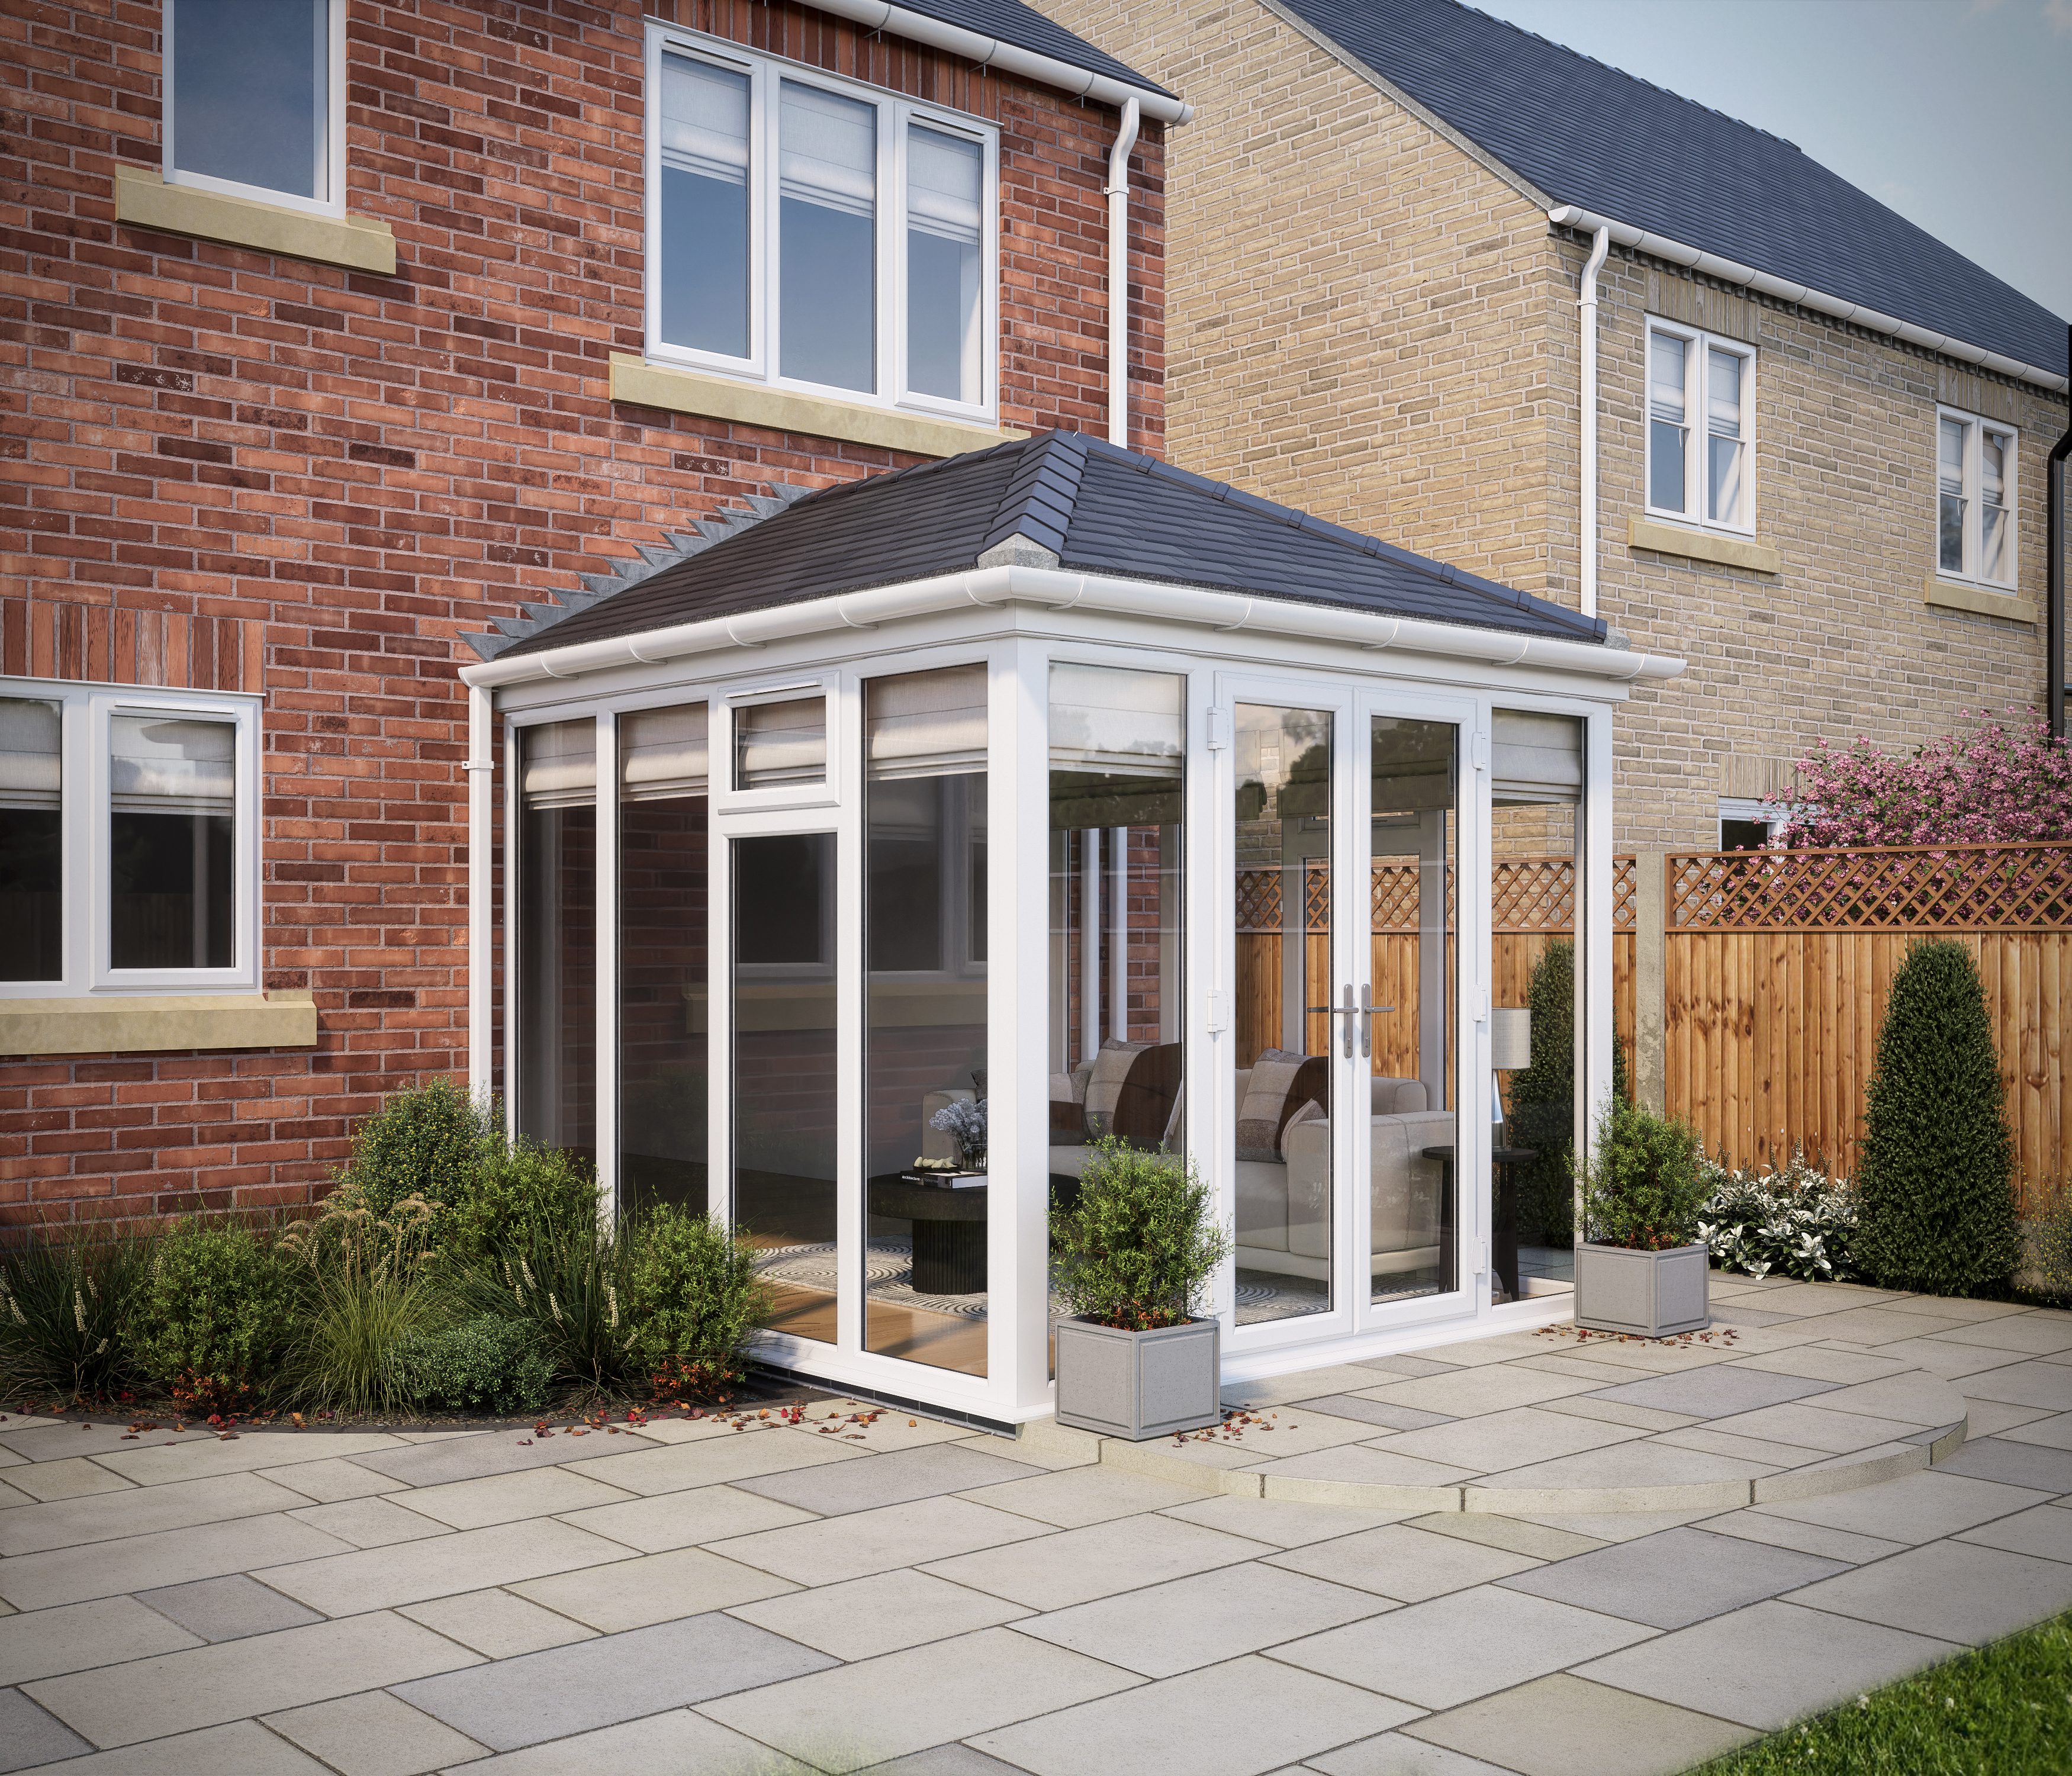 SOLid Roof Full Height Edwardian Conservatory White Frames with Titanium Grey Tiles - 10 x 10ft